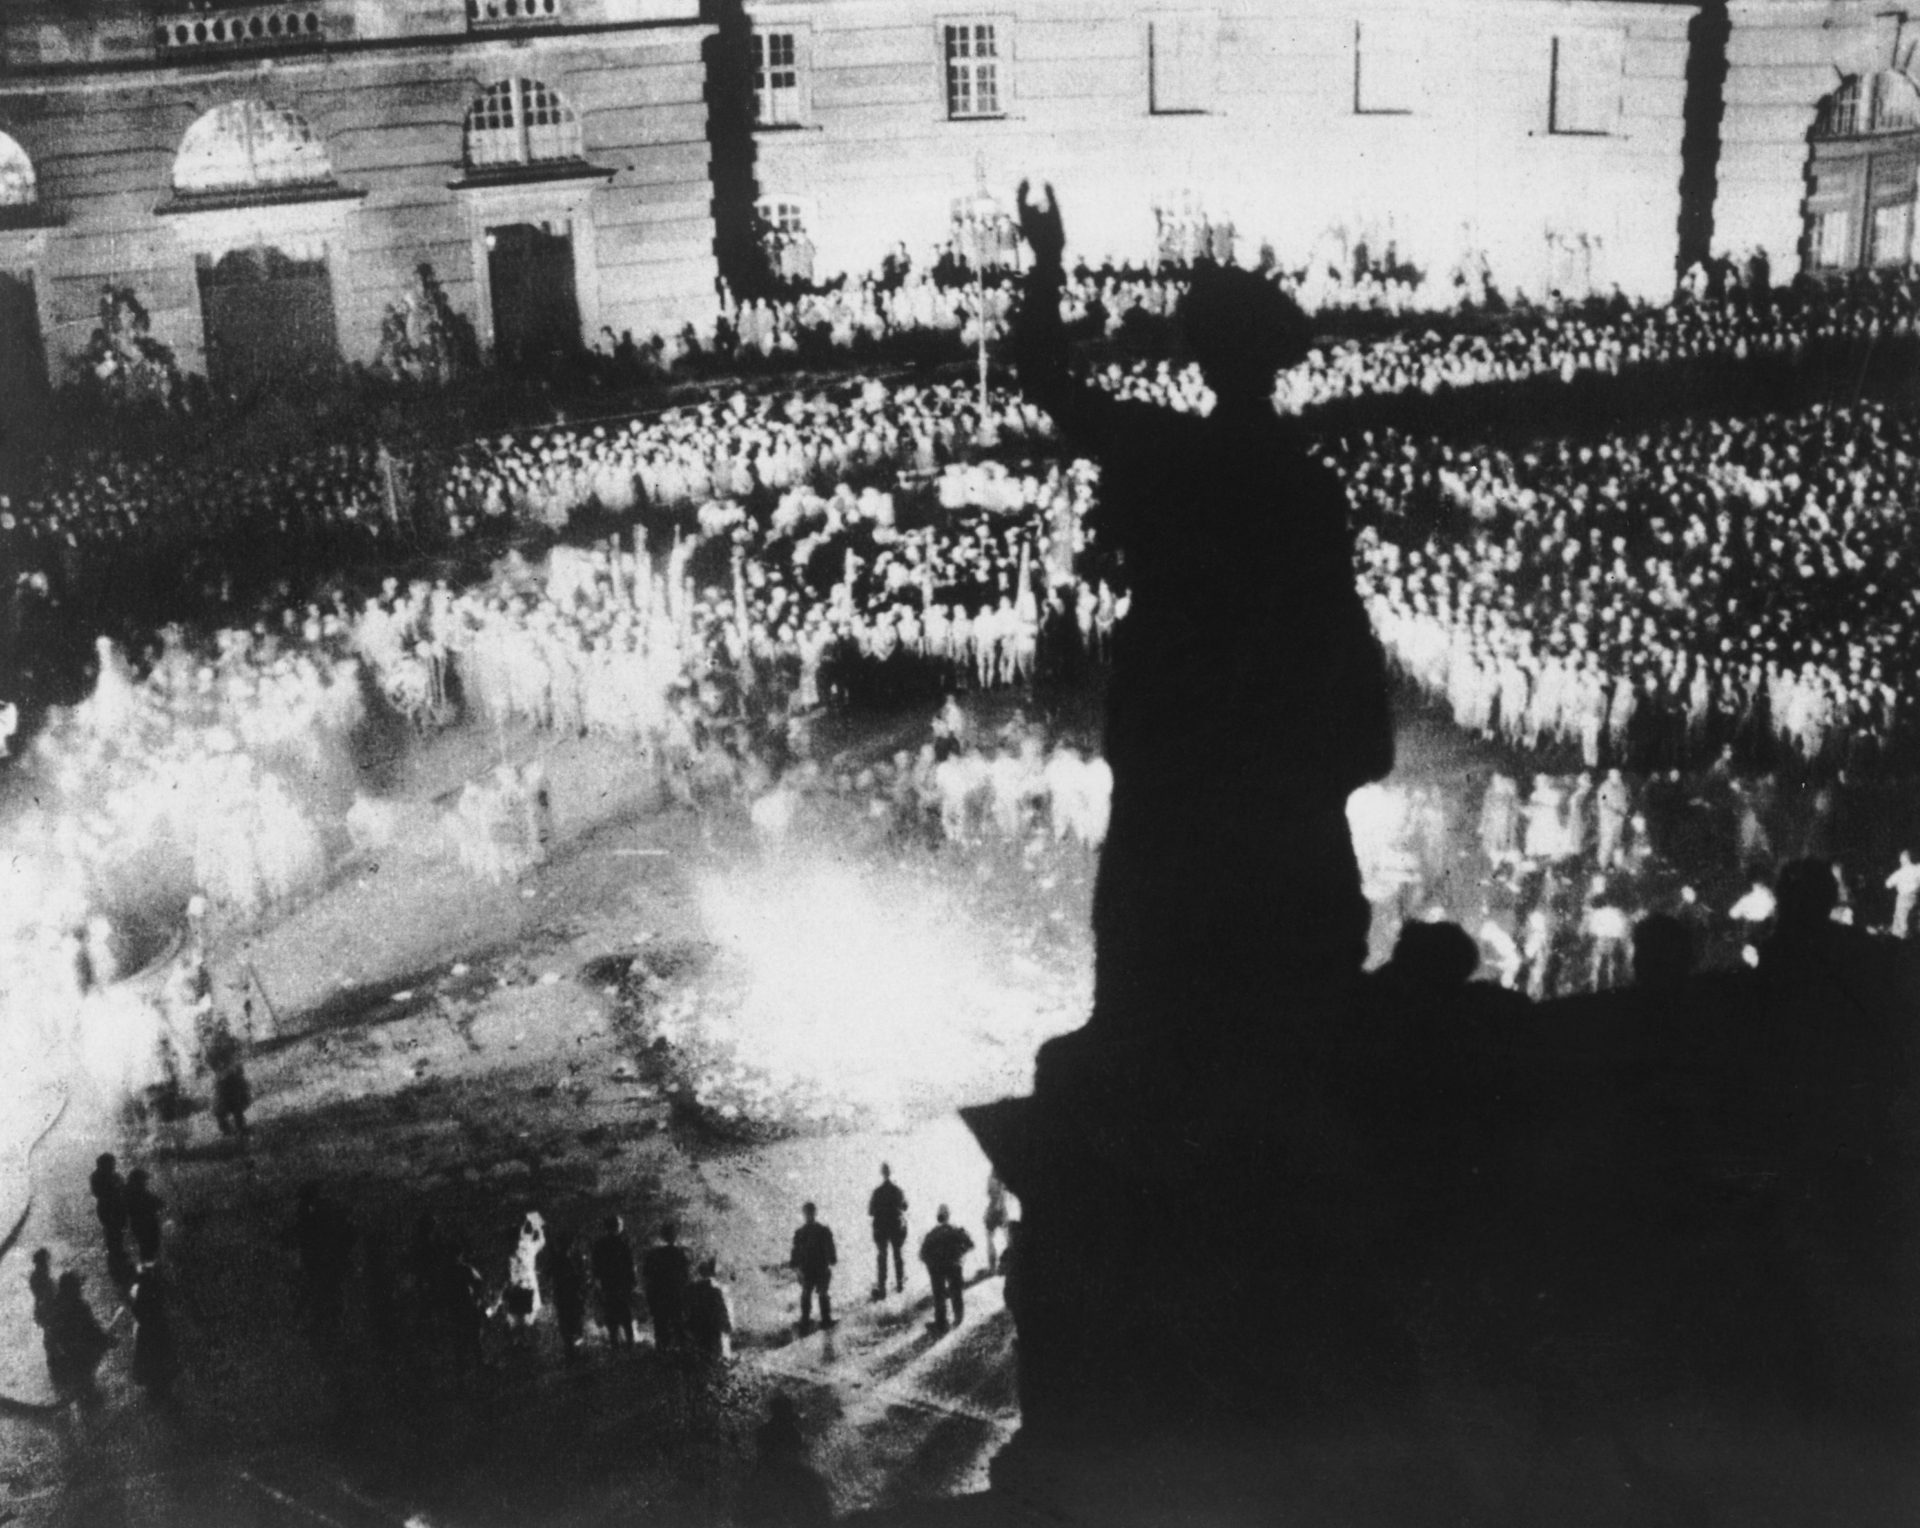 A crowd of 40,000 watch the burning of books in Berlin on May 10, 1933. Photo: Keystone/ Hulton Archive/Getty
Images